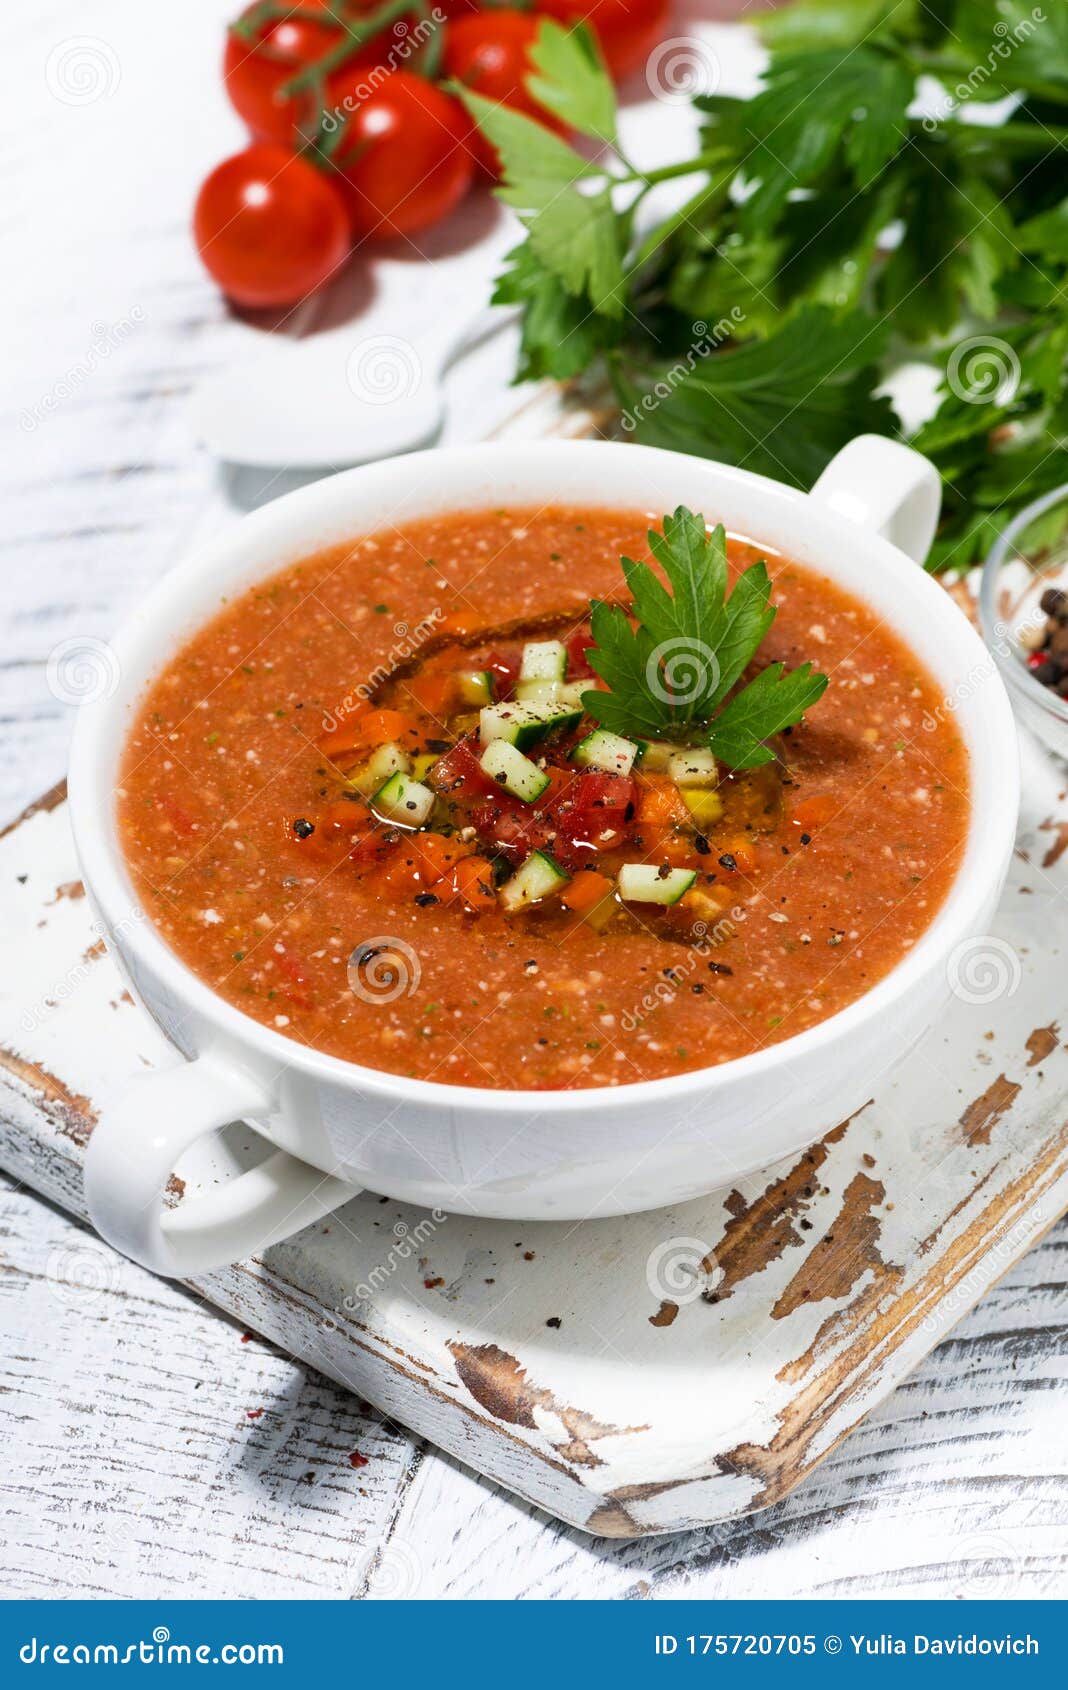 Cold Tomato Soup in a Bowl, Vertical Stock Image - Image of snack ...